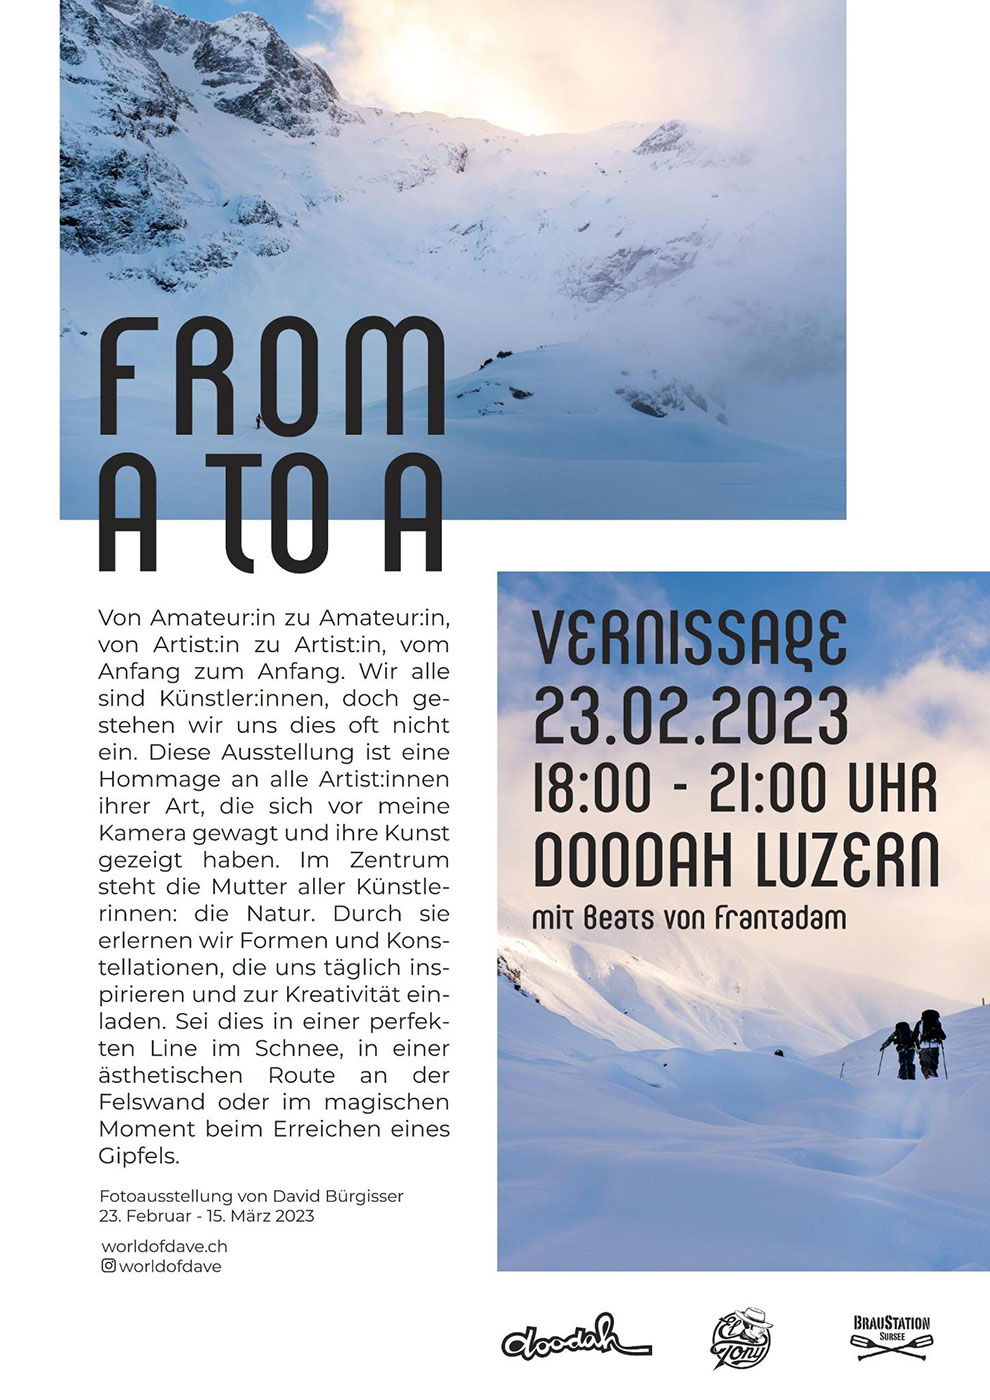 FROM A TO A - VERNISSAGE AT DOODAH LUZERN